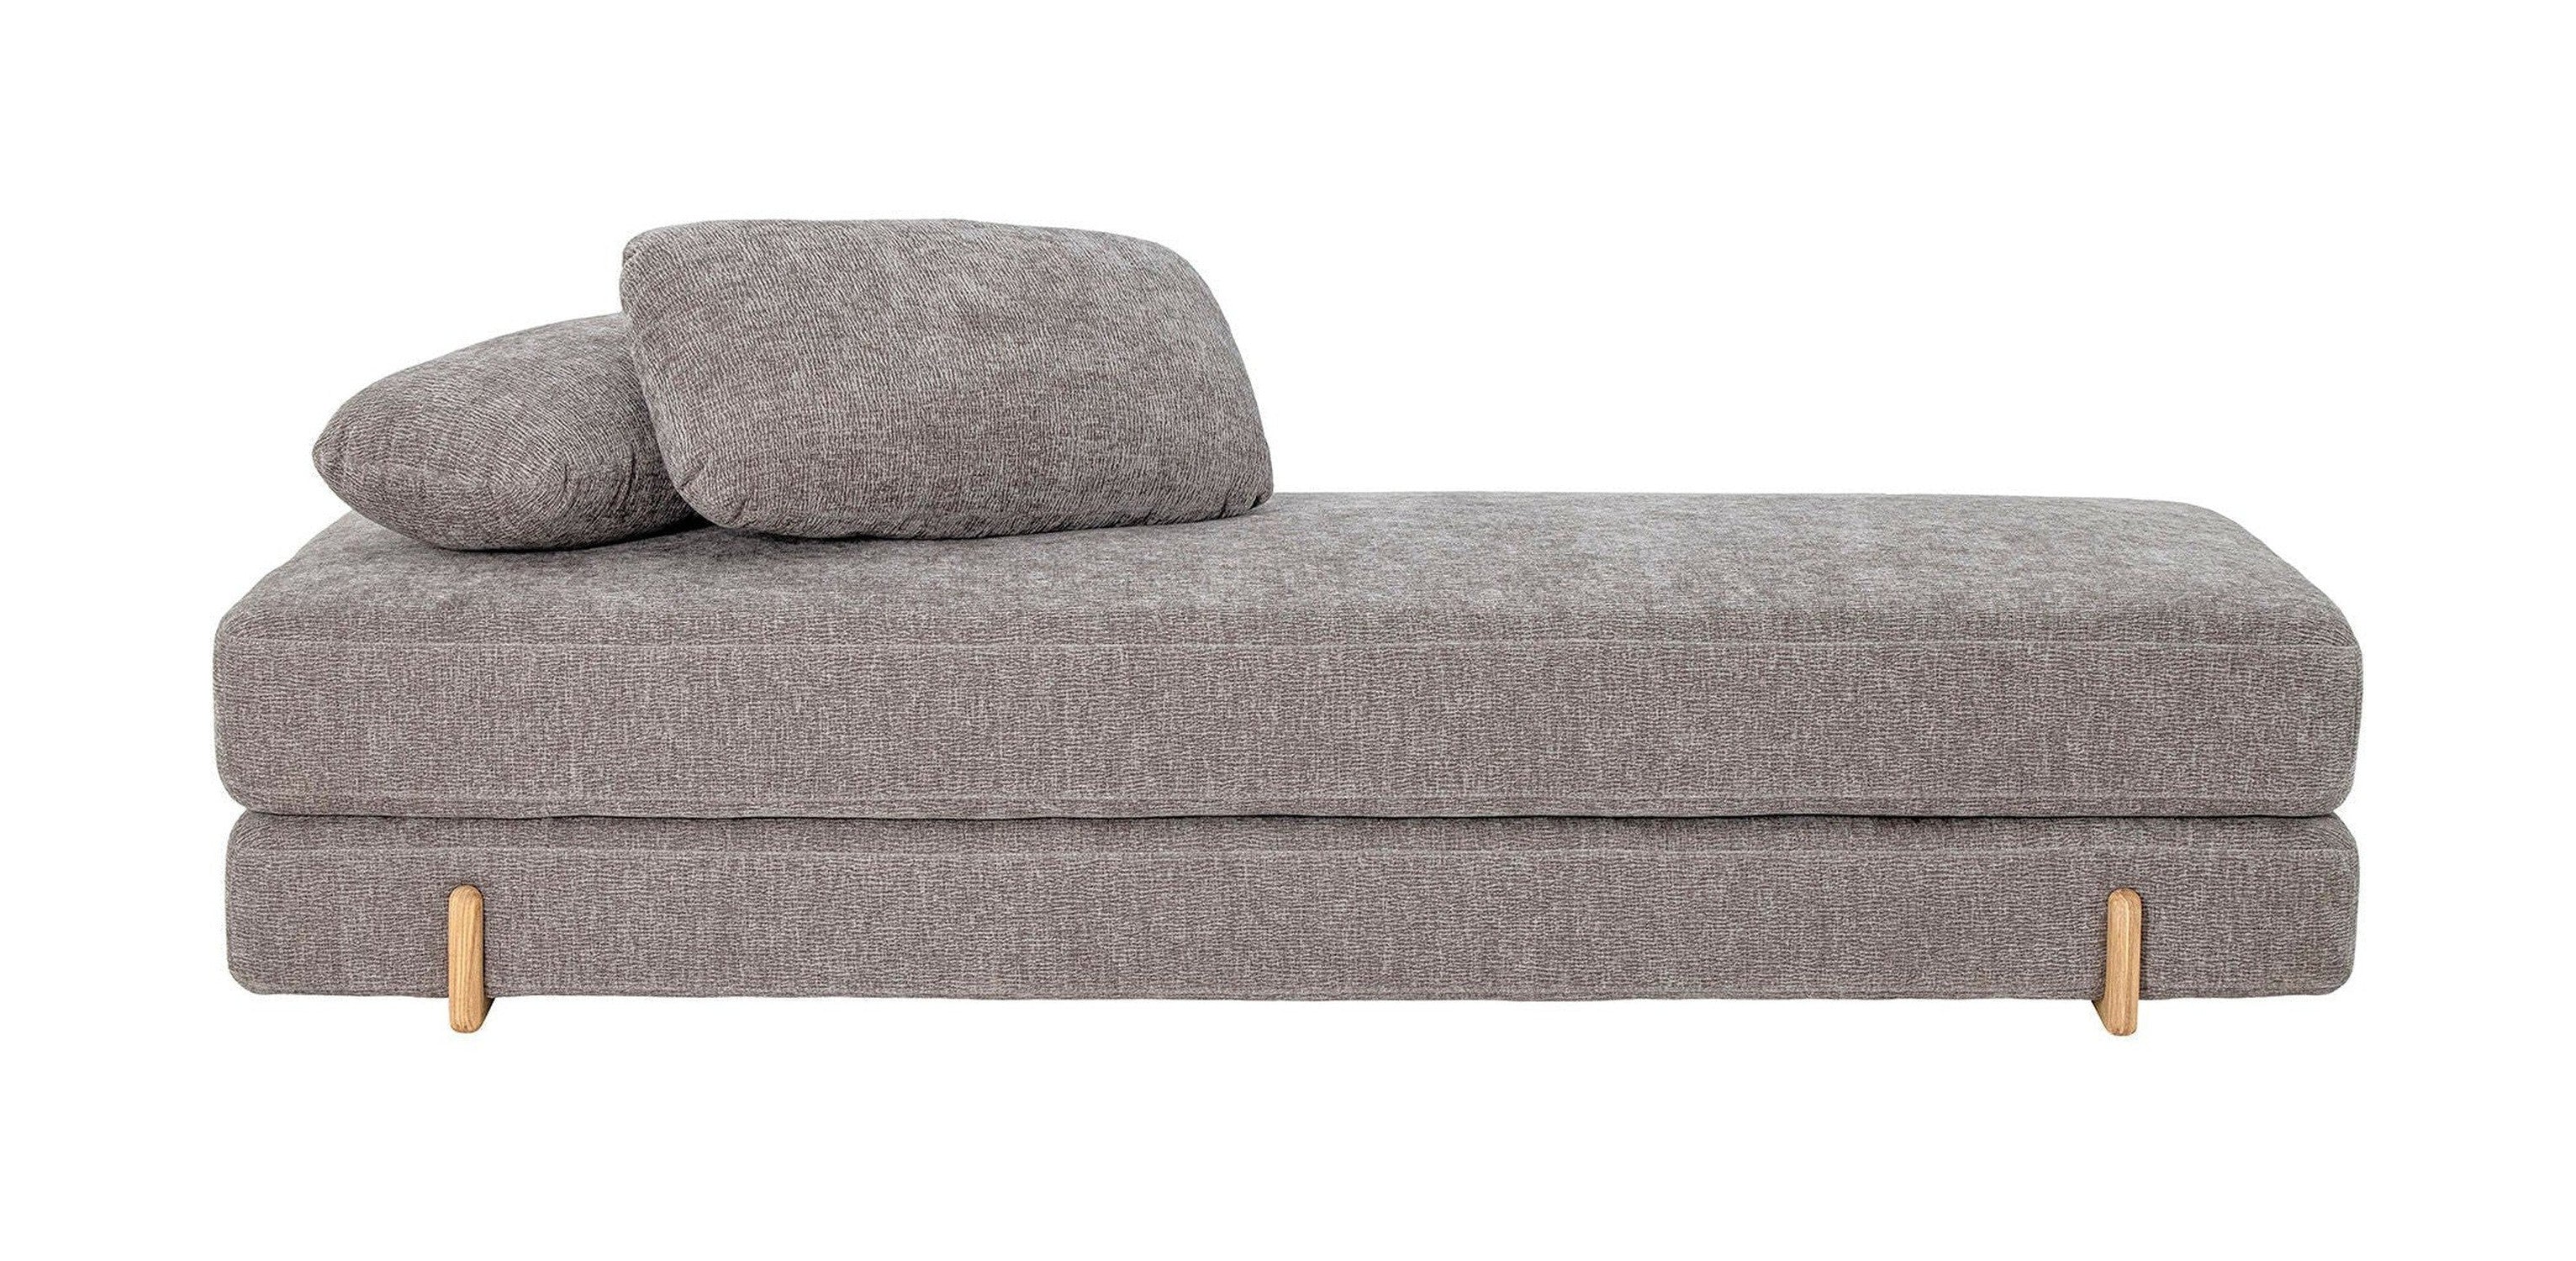 Bloomingville Groove Daybed, Grey, Polyester